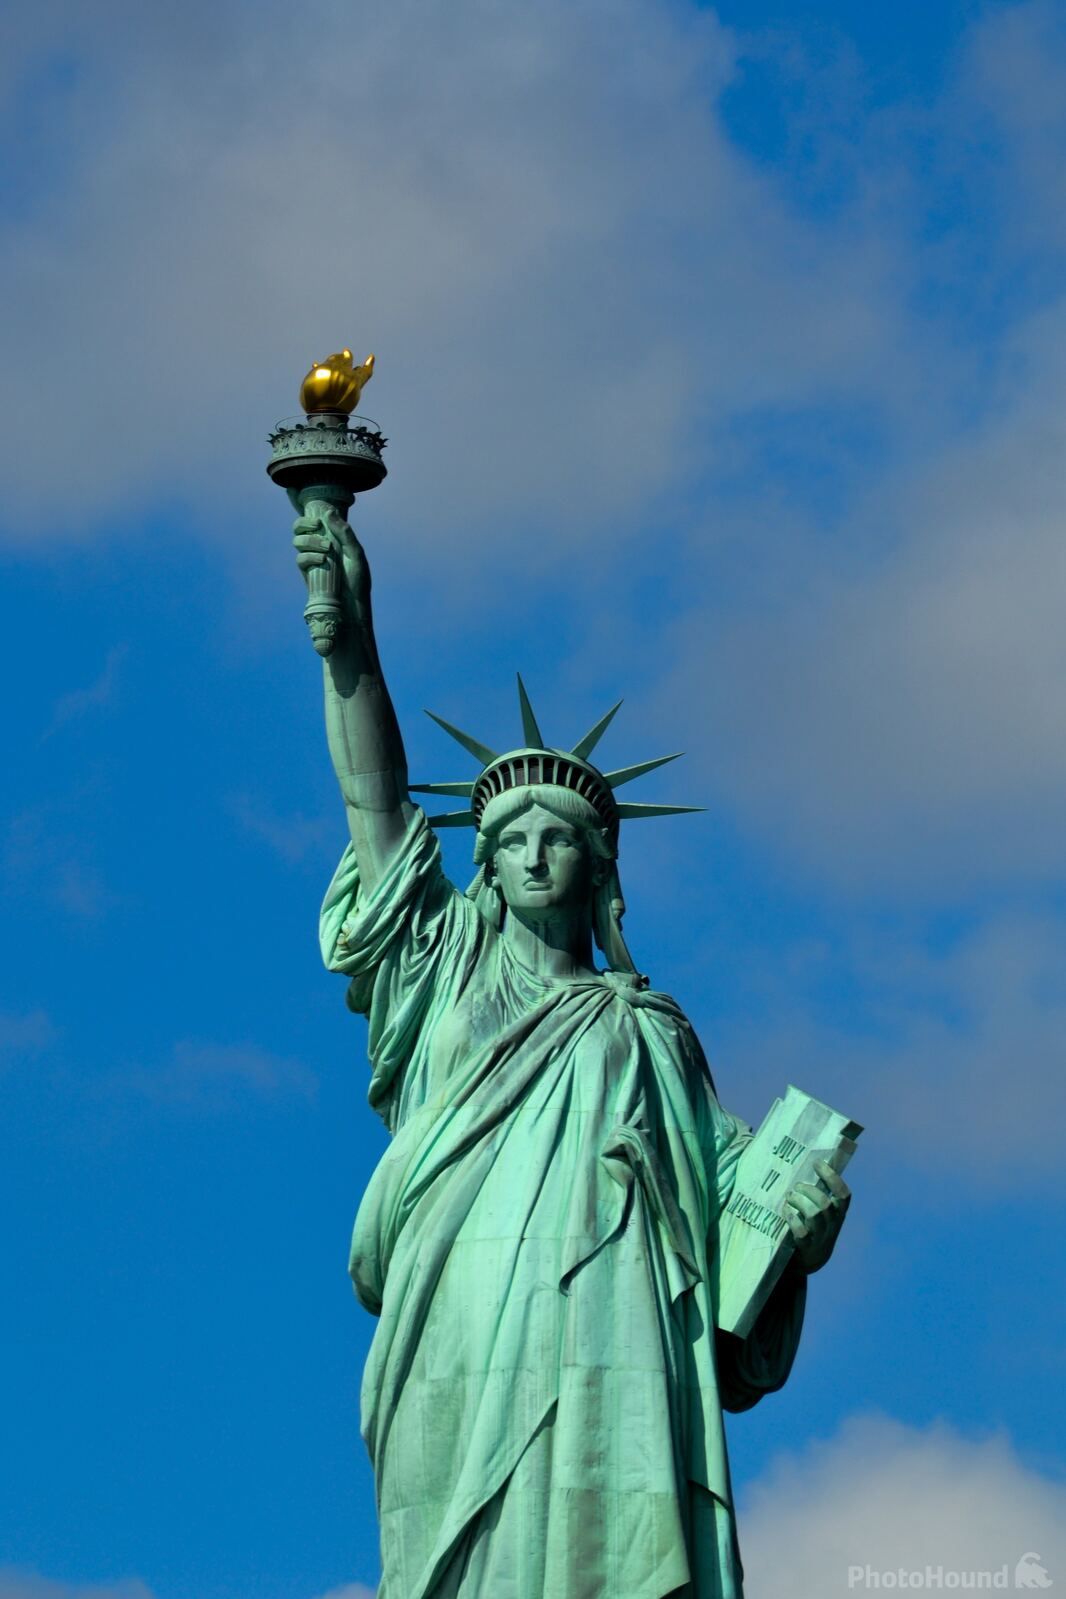 Image of Statue Of Liberty from Staten Island Ferry by Team PhotoHound